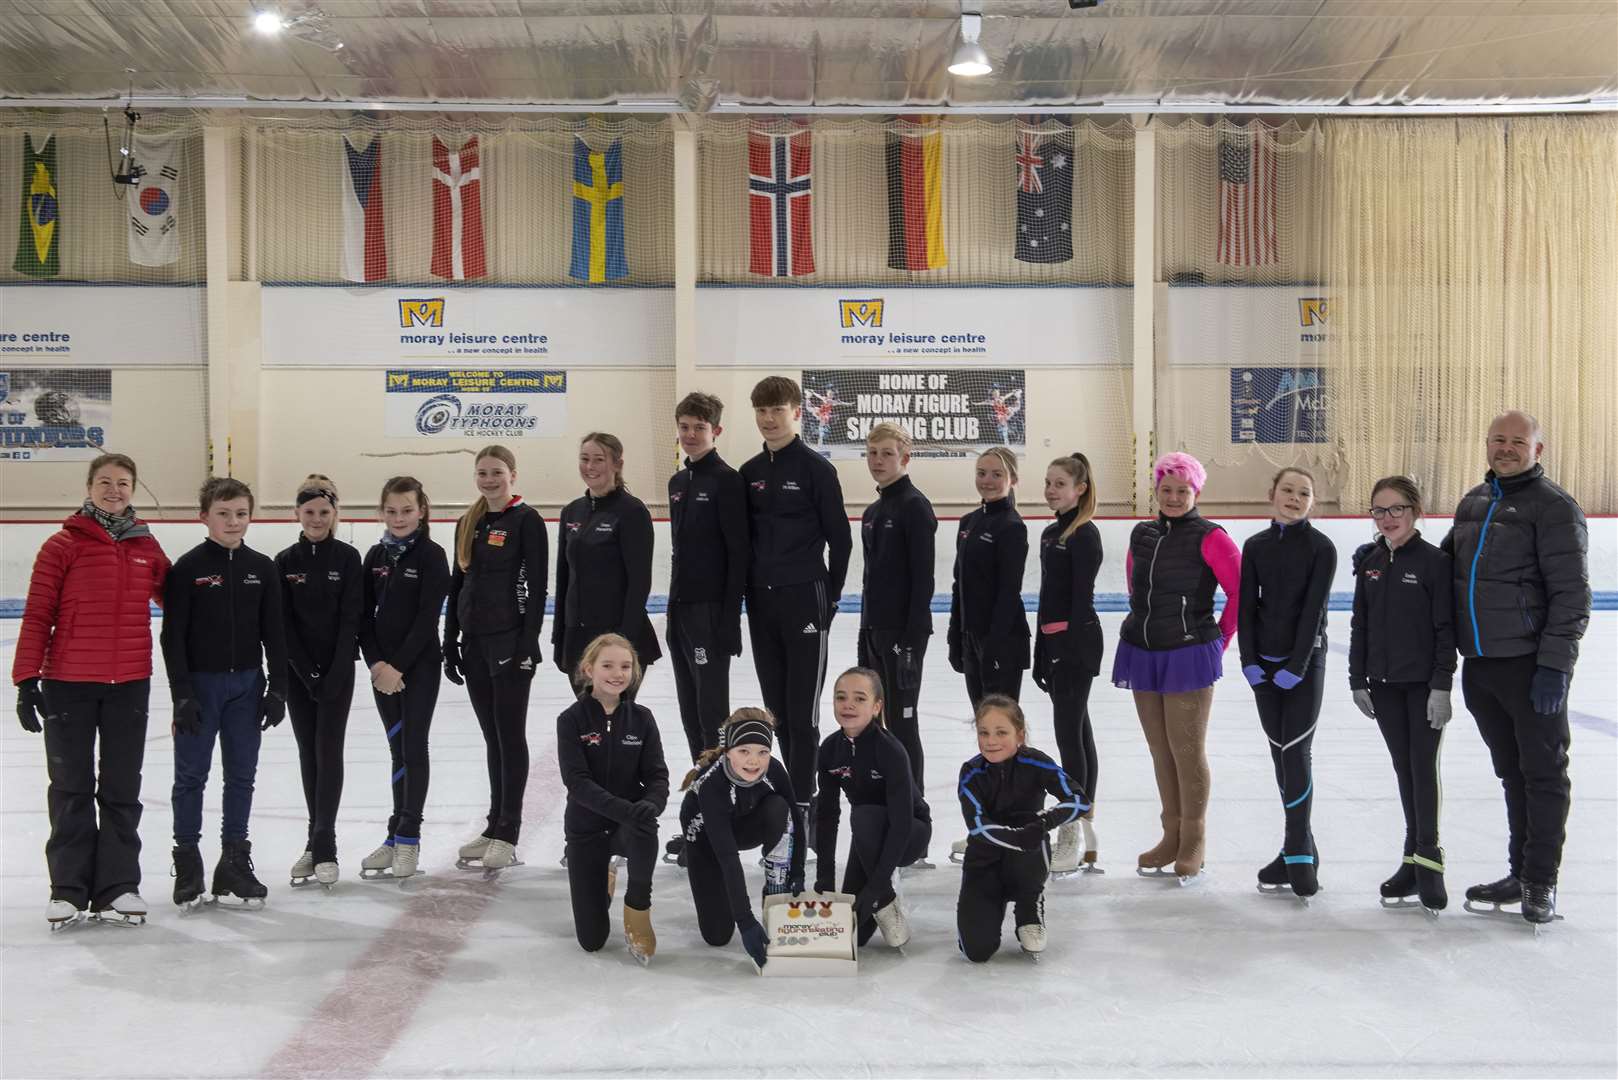 Moray Figure Skating Club has recently passed 100 medal wins in national competitions. Picture: Helen Crowley